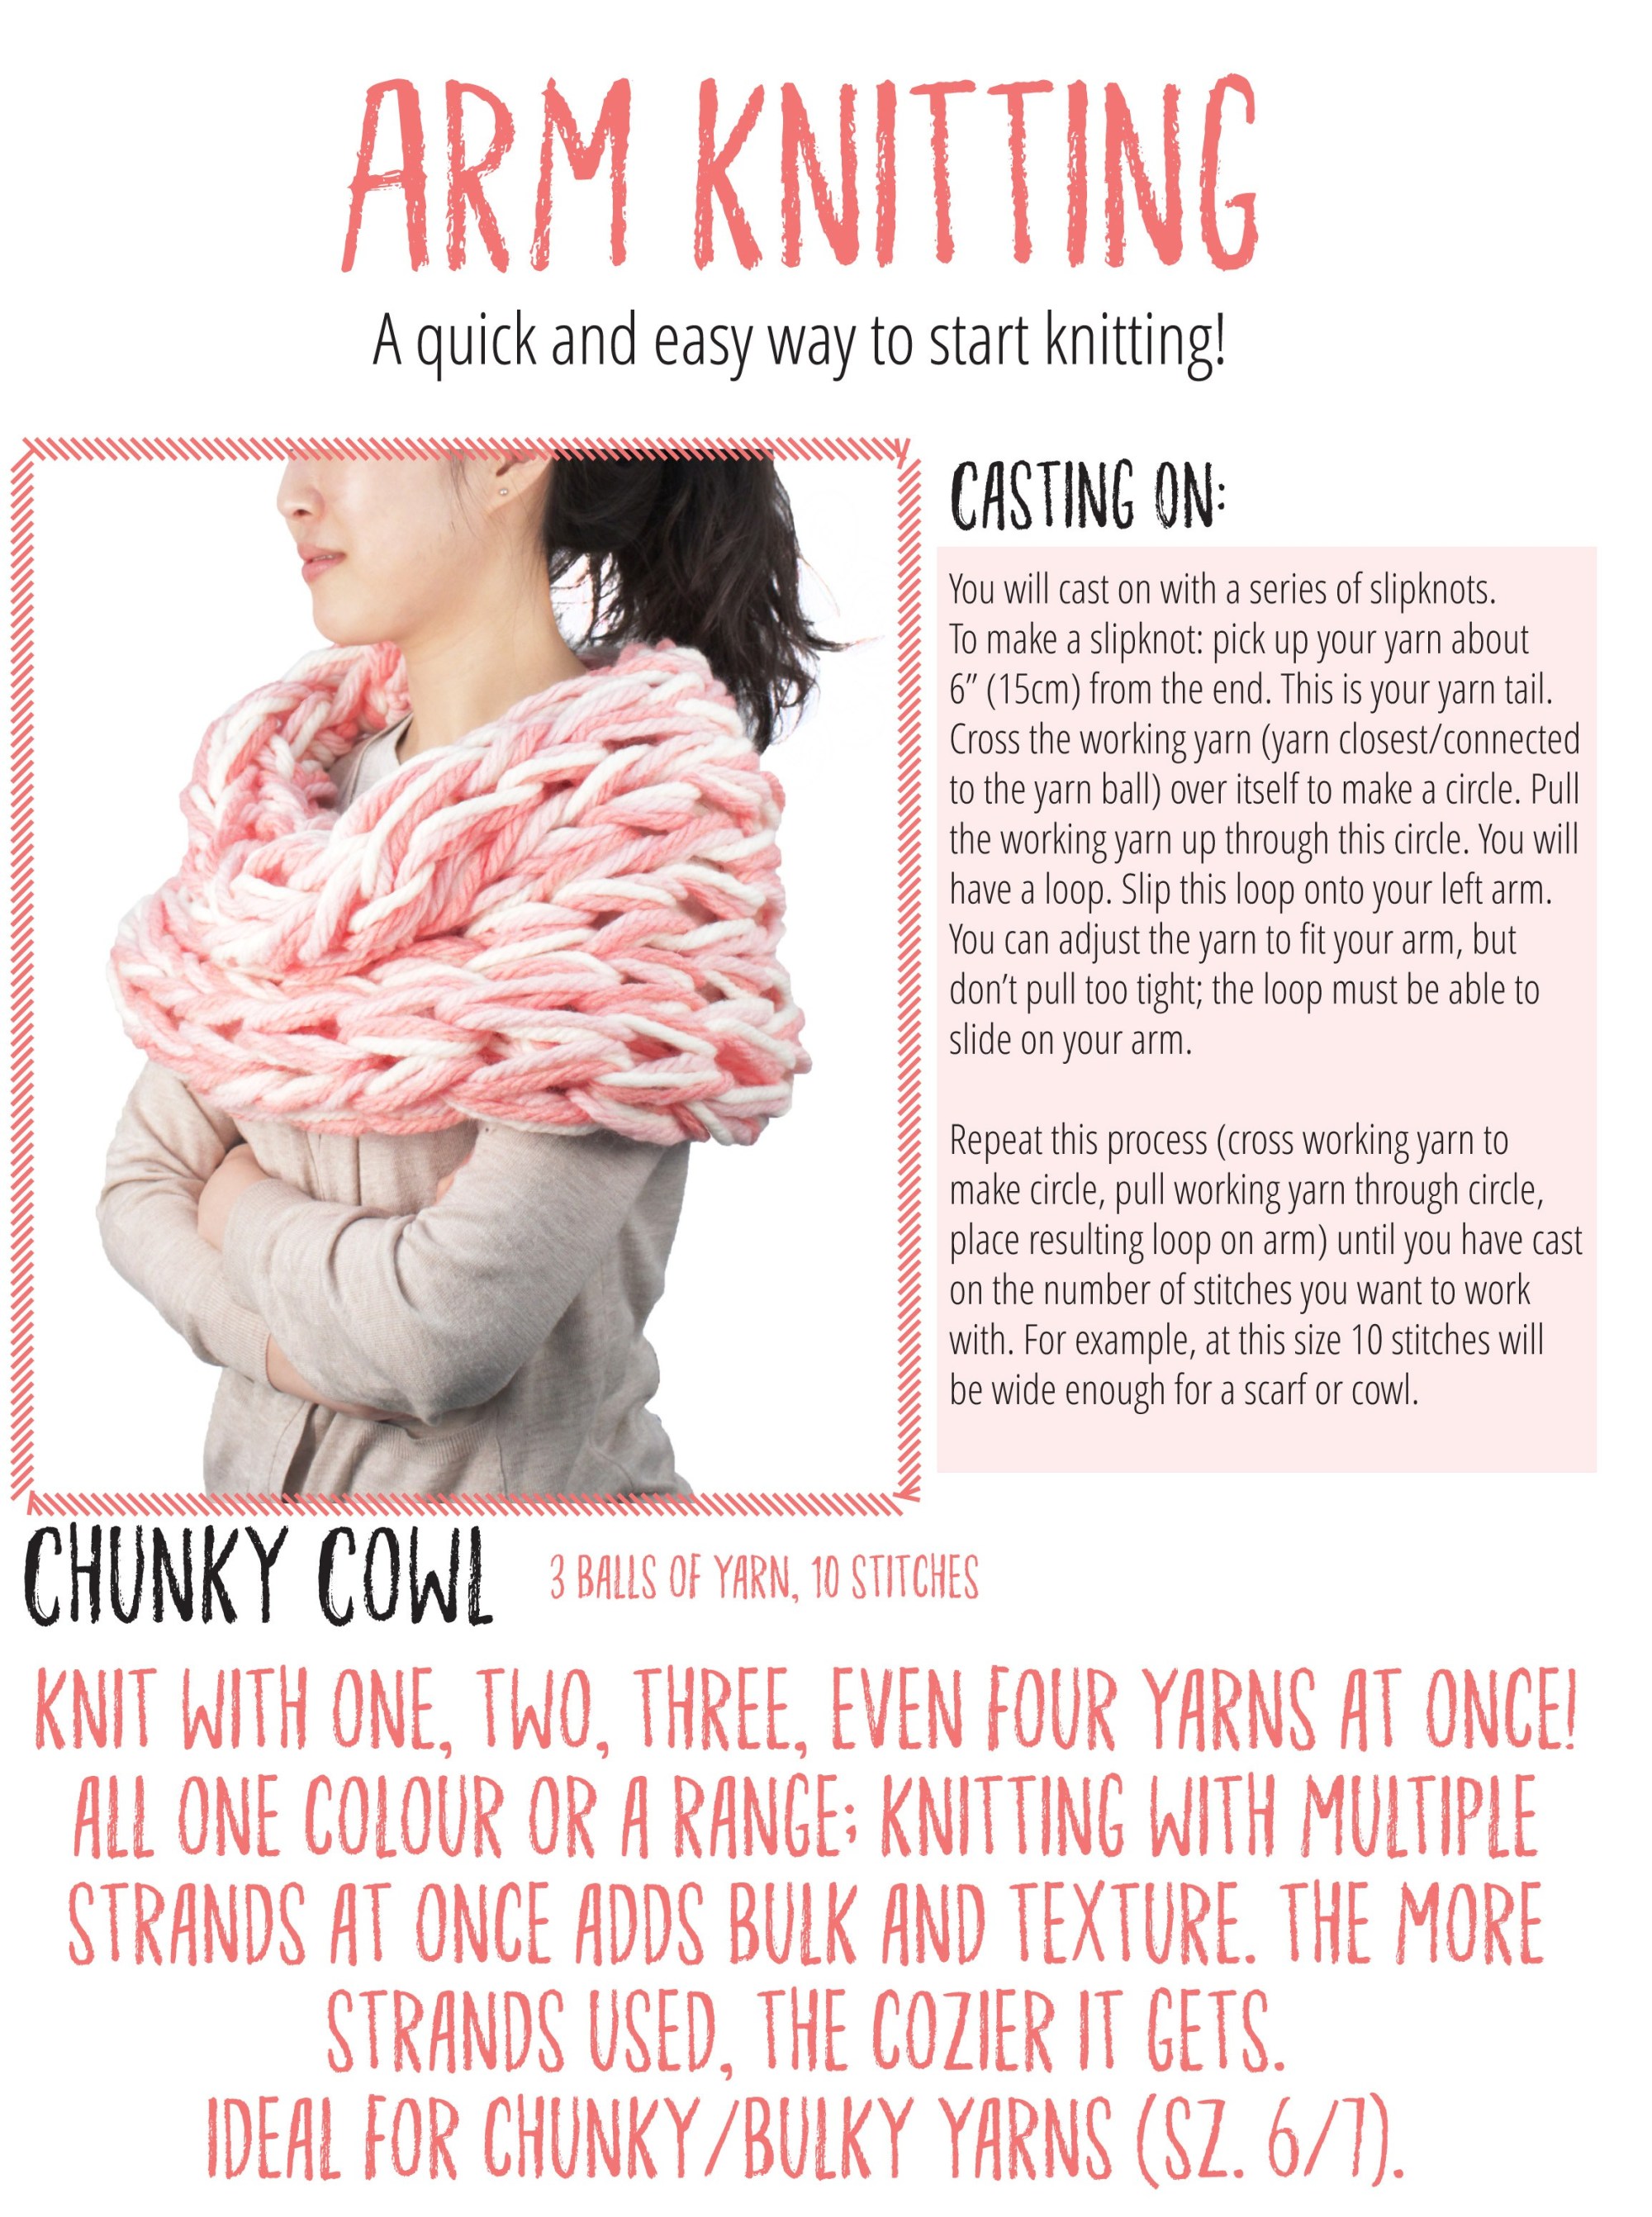 Instructions on create a chunky cowl scarf & how to cast on a series of slipknots